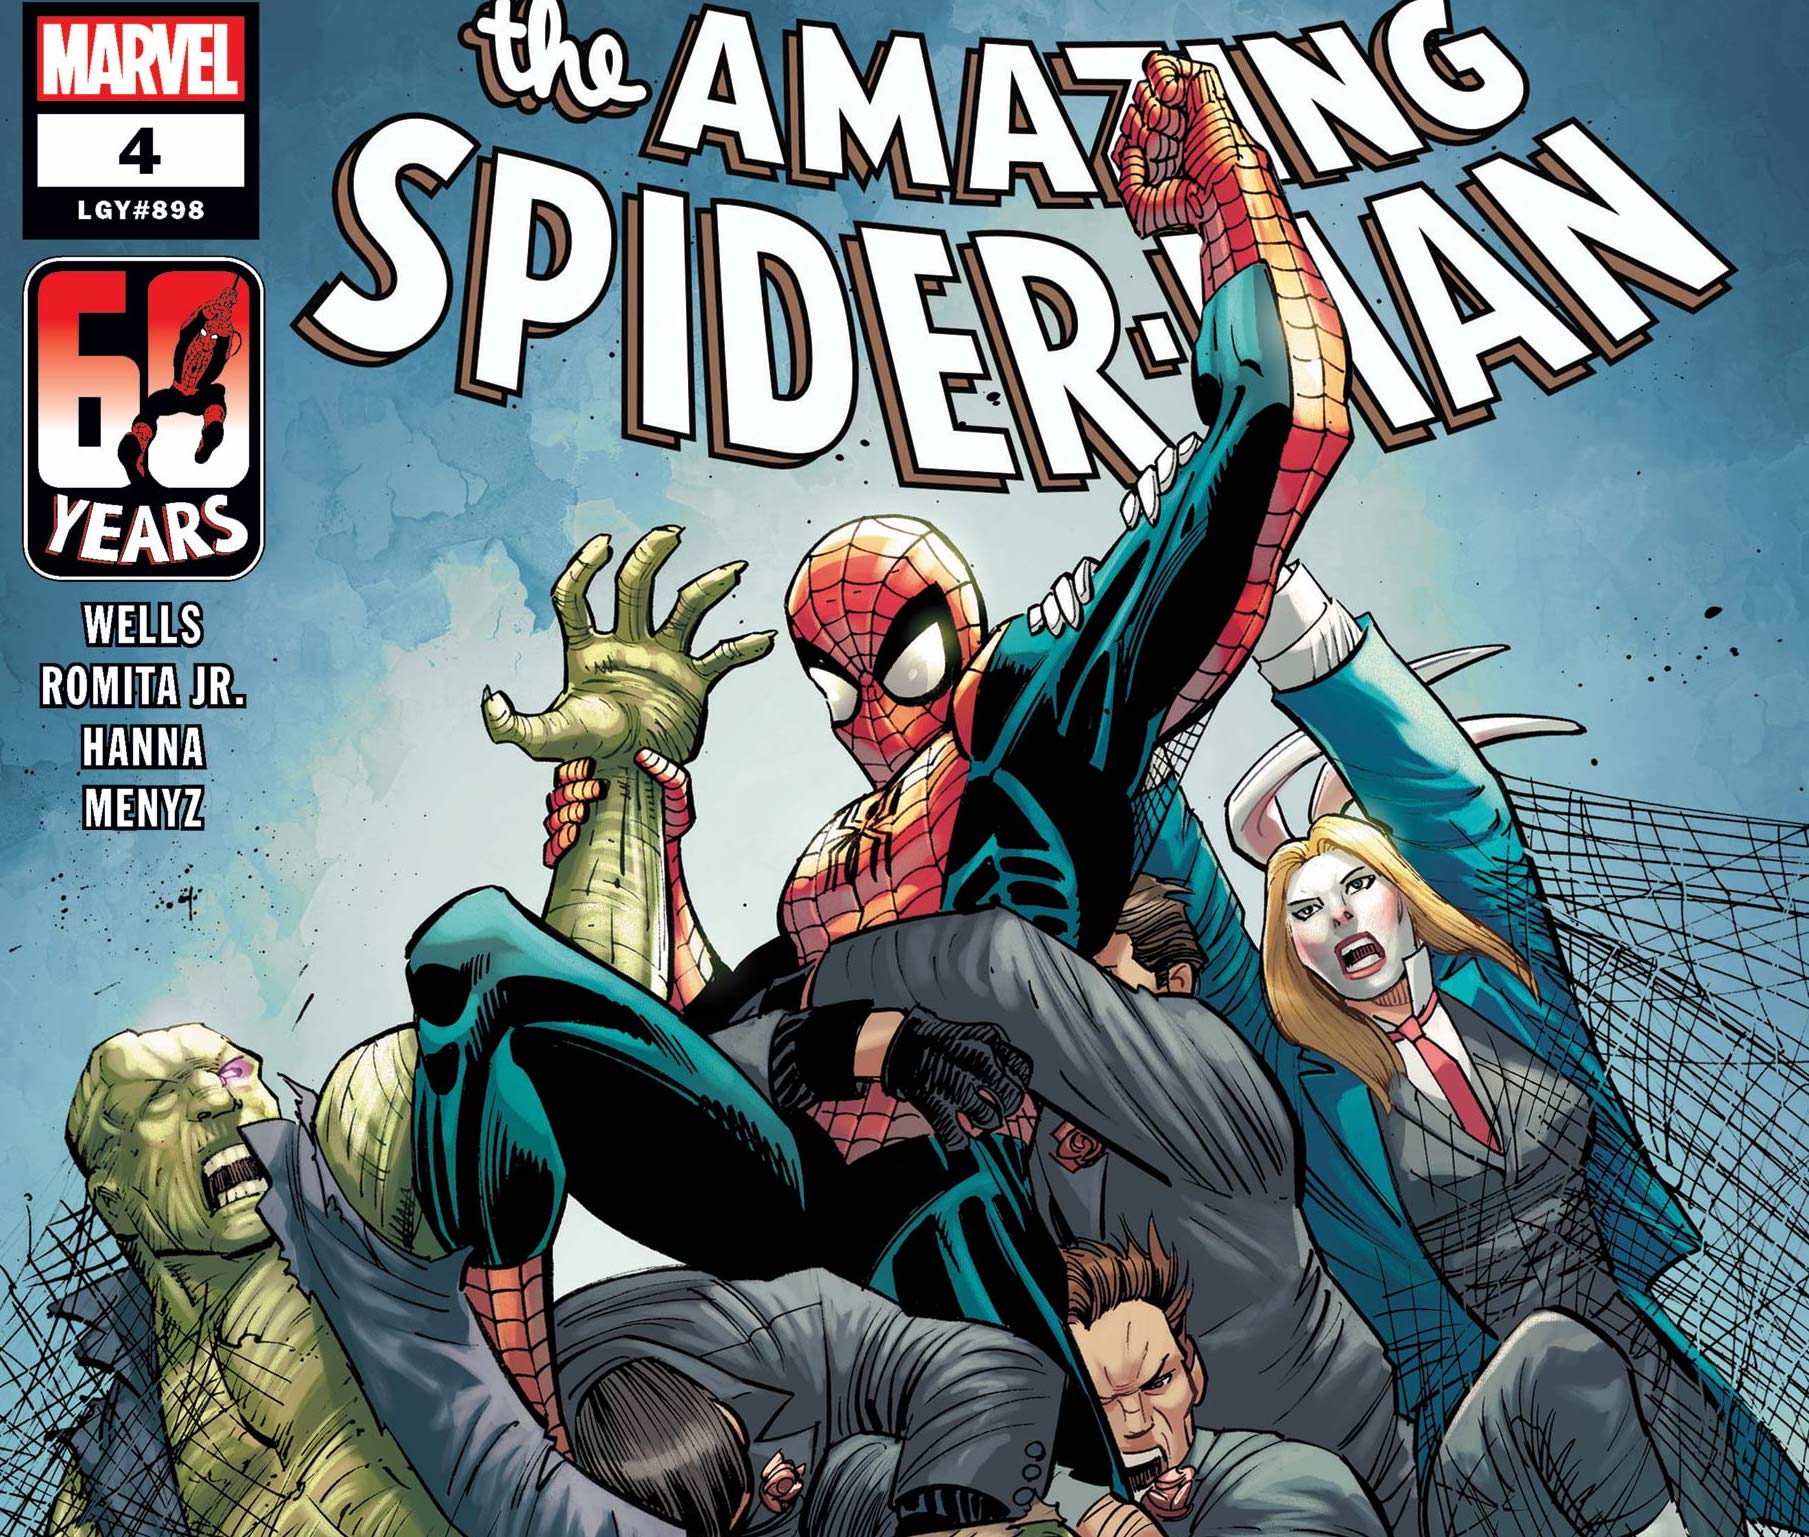 'Amazing Spider-Man' #4 finds a new gear and a new low for Spidey